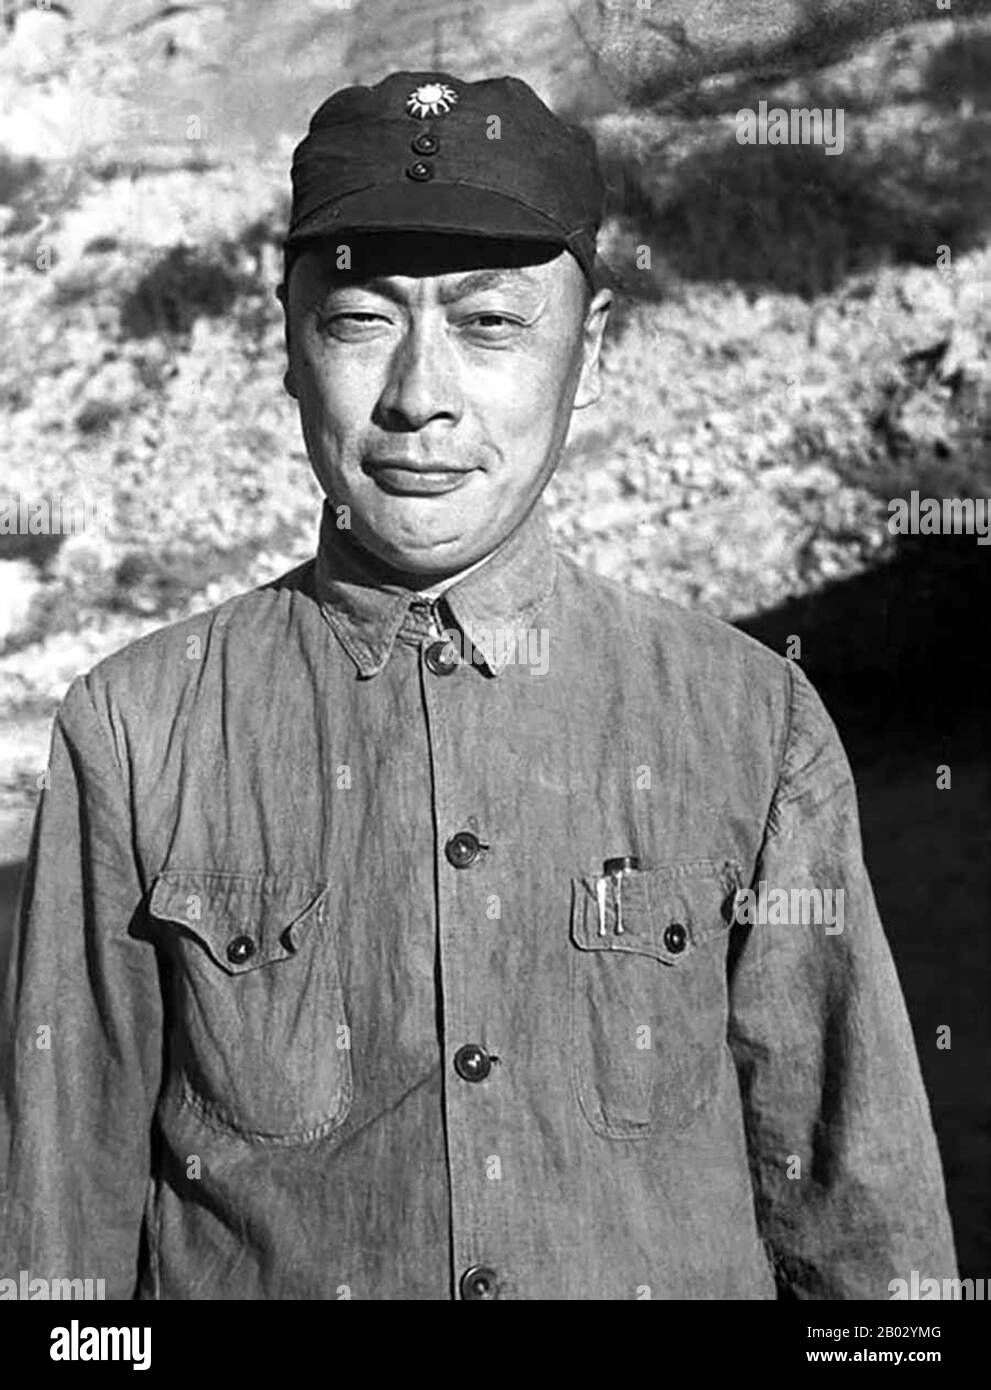 Chen was born in Lezhi, near Chengdu, Sichuan, into a moderately wealthy magistrate's family. A comrade of Lin Biao from their guerilla days, Chen was a commander of the New Fourth Army during the Sino-Japanese War (1937-1945), spearheaded the Shandong counter-offensive during the Chinese Civil War, and later commanded the Communist armies that defeated the KMT forces at Huai-Hai and conquered the lower Yangtze region in 1948-49.  He was made a Marshal of the People's Liberation Army (PLA) in 1955. After the founding of the People's Republic of China, Chen became mayor of Shanghai. He also ser Stock Photo